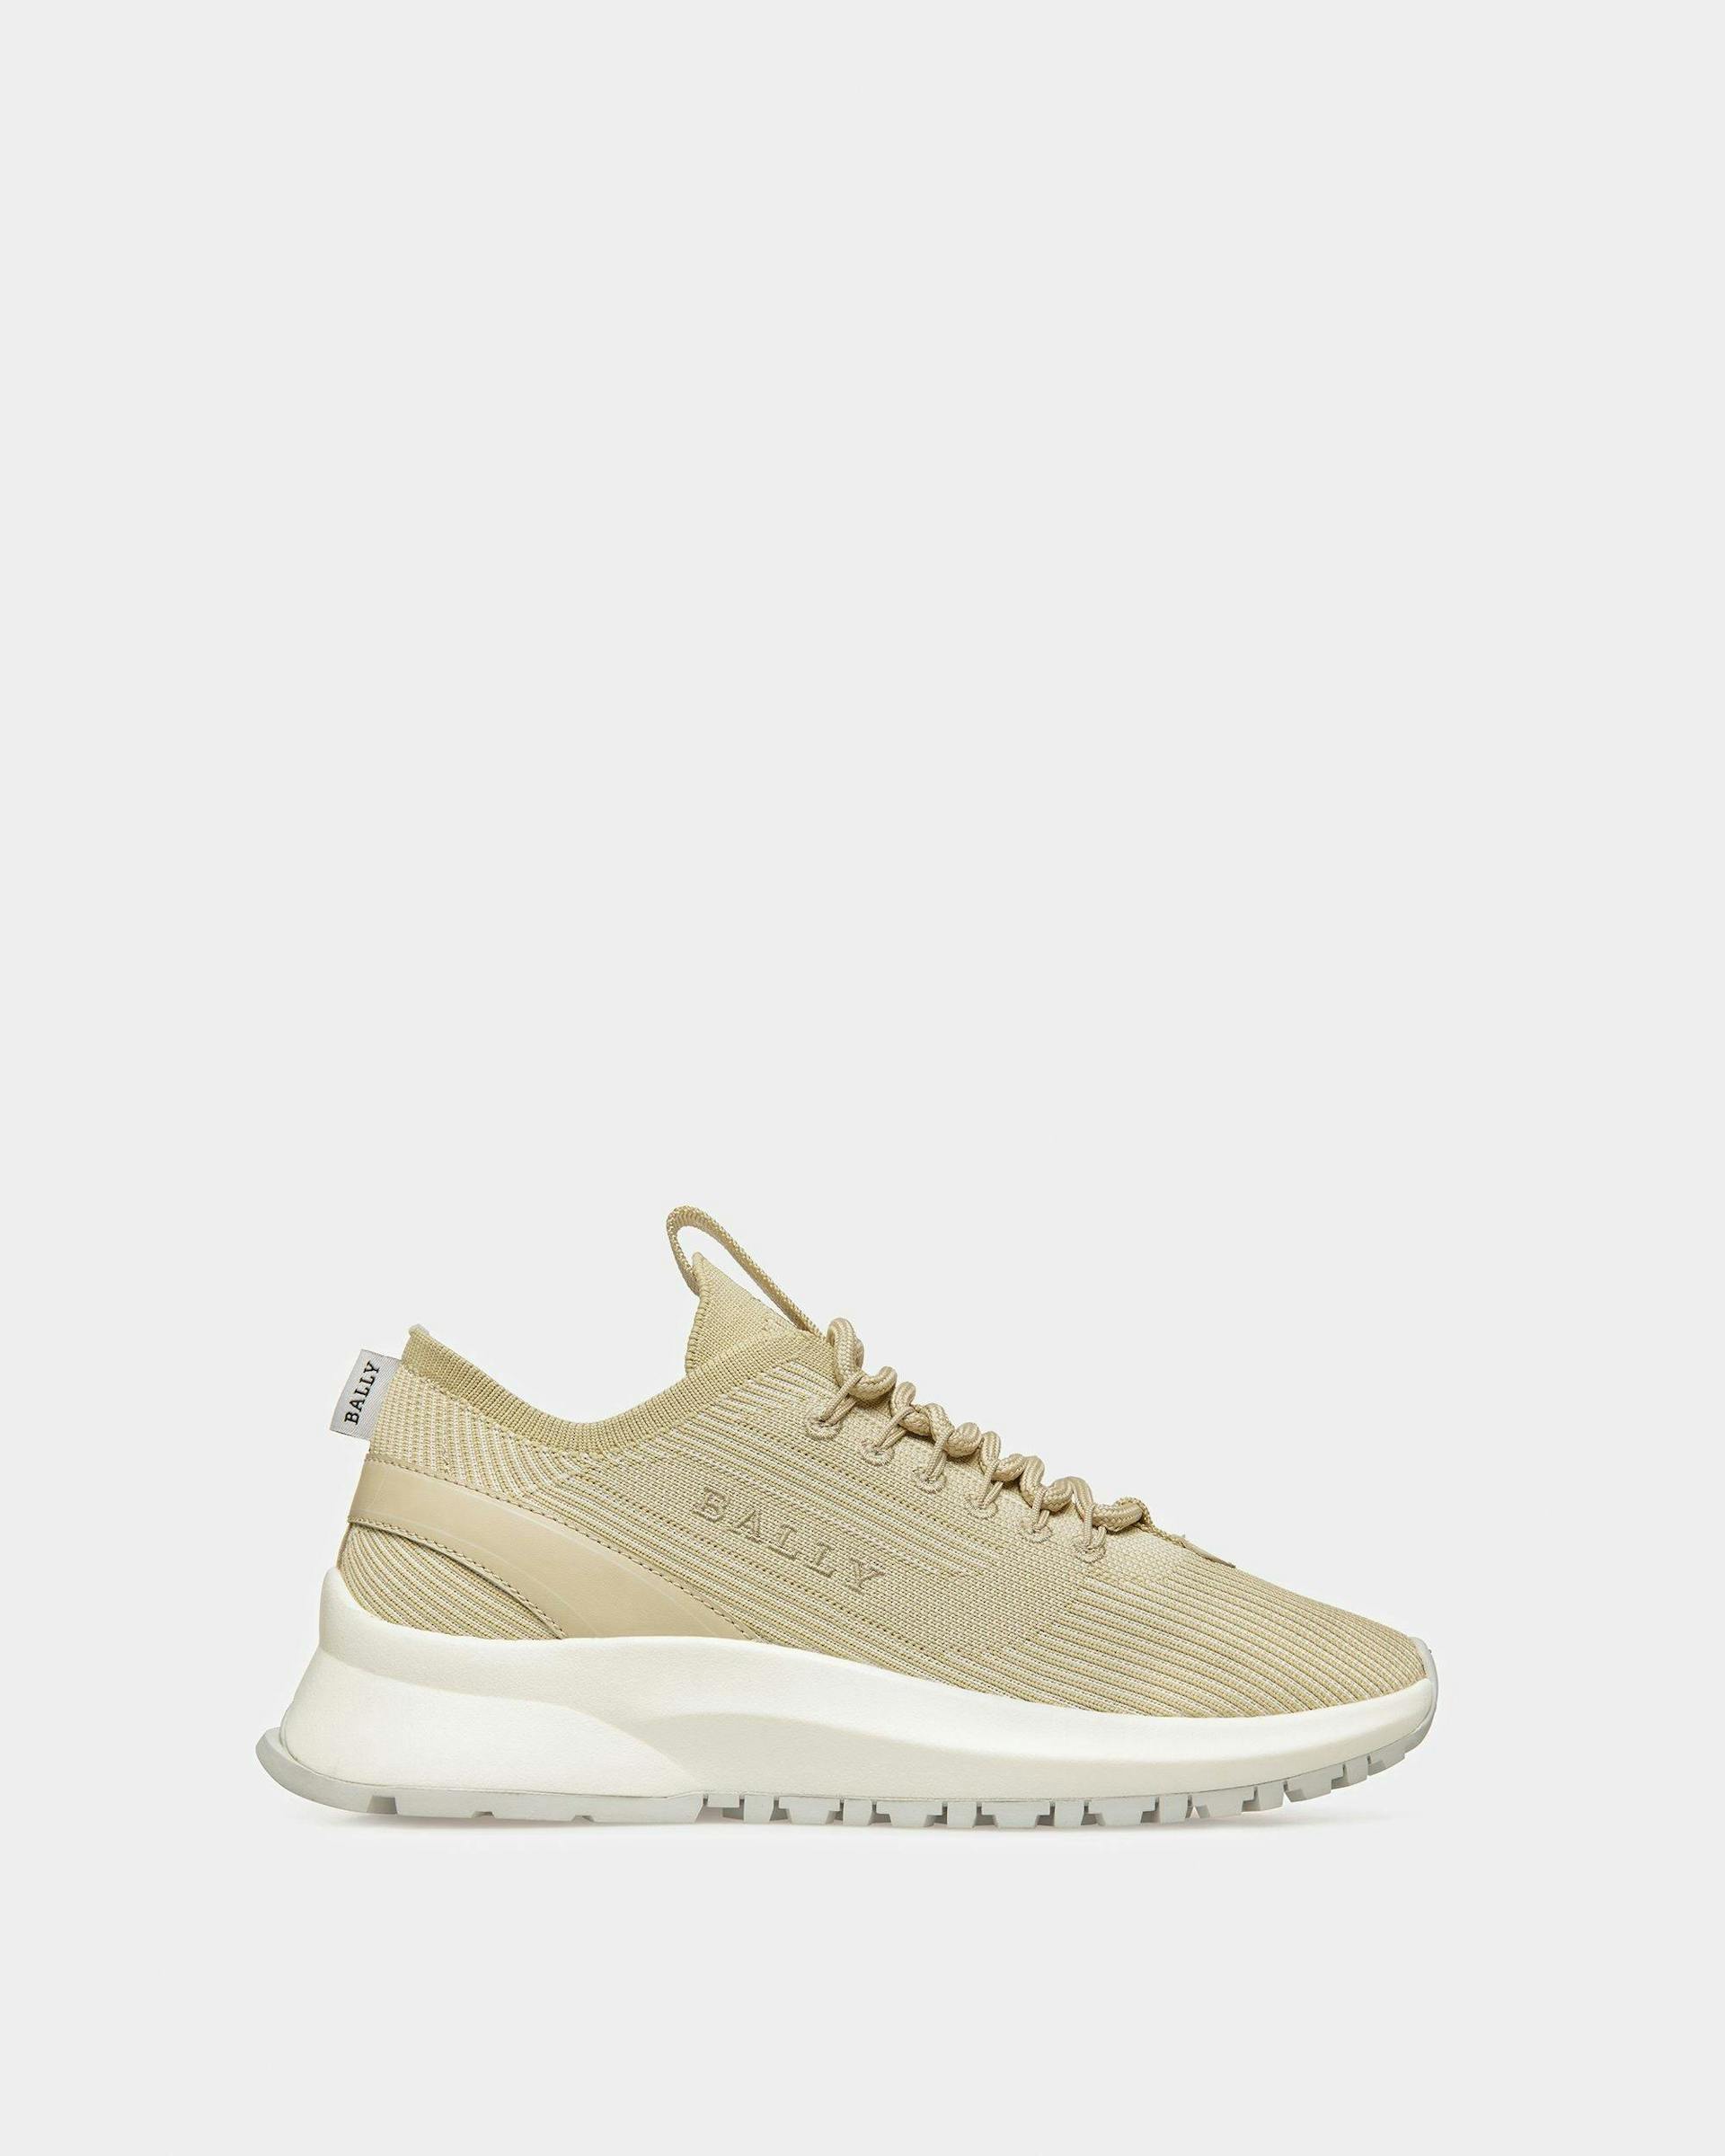 Dean | Women's Sneakers | Dusty White And Light Beige Leather, Fabric ...